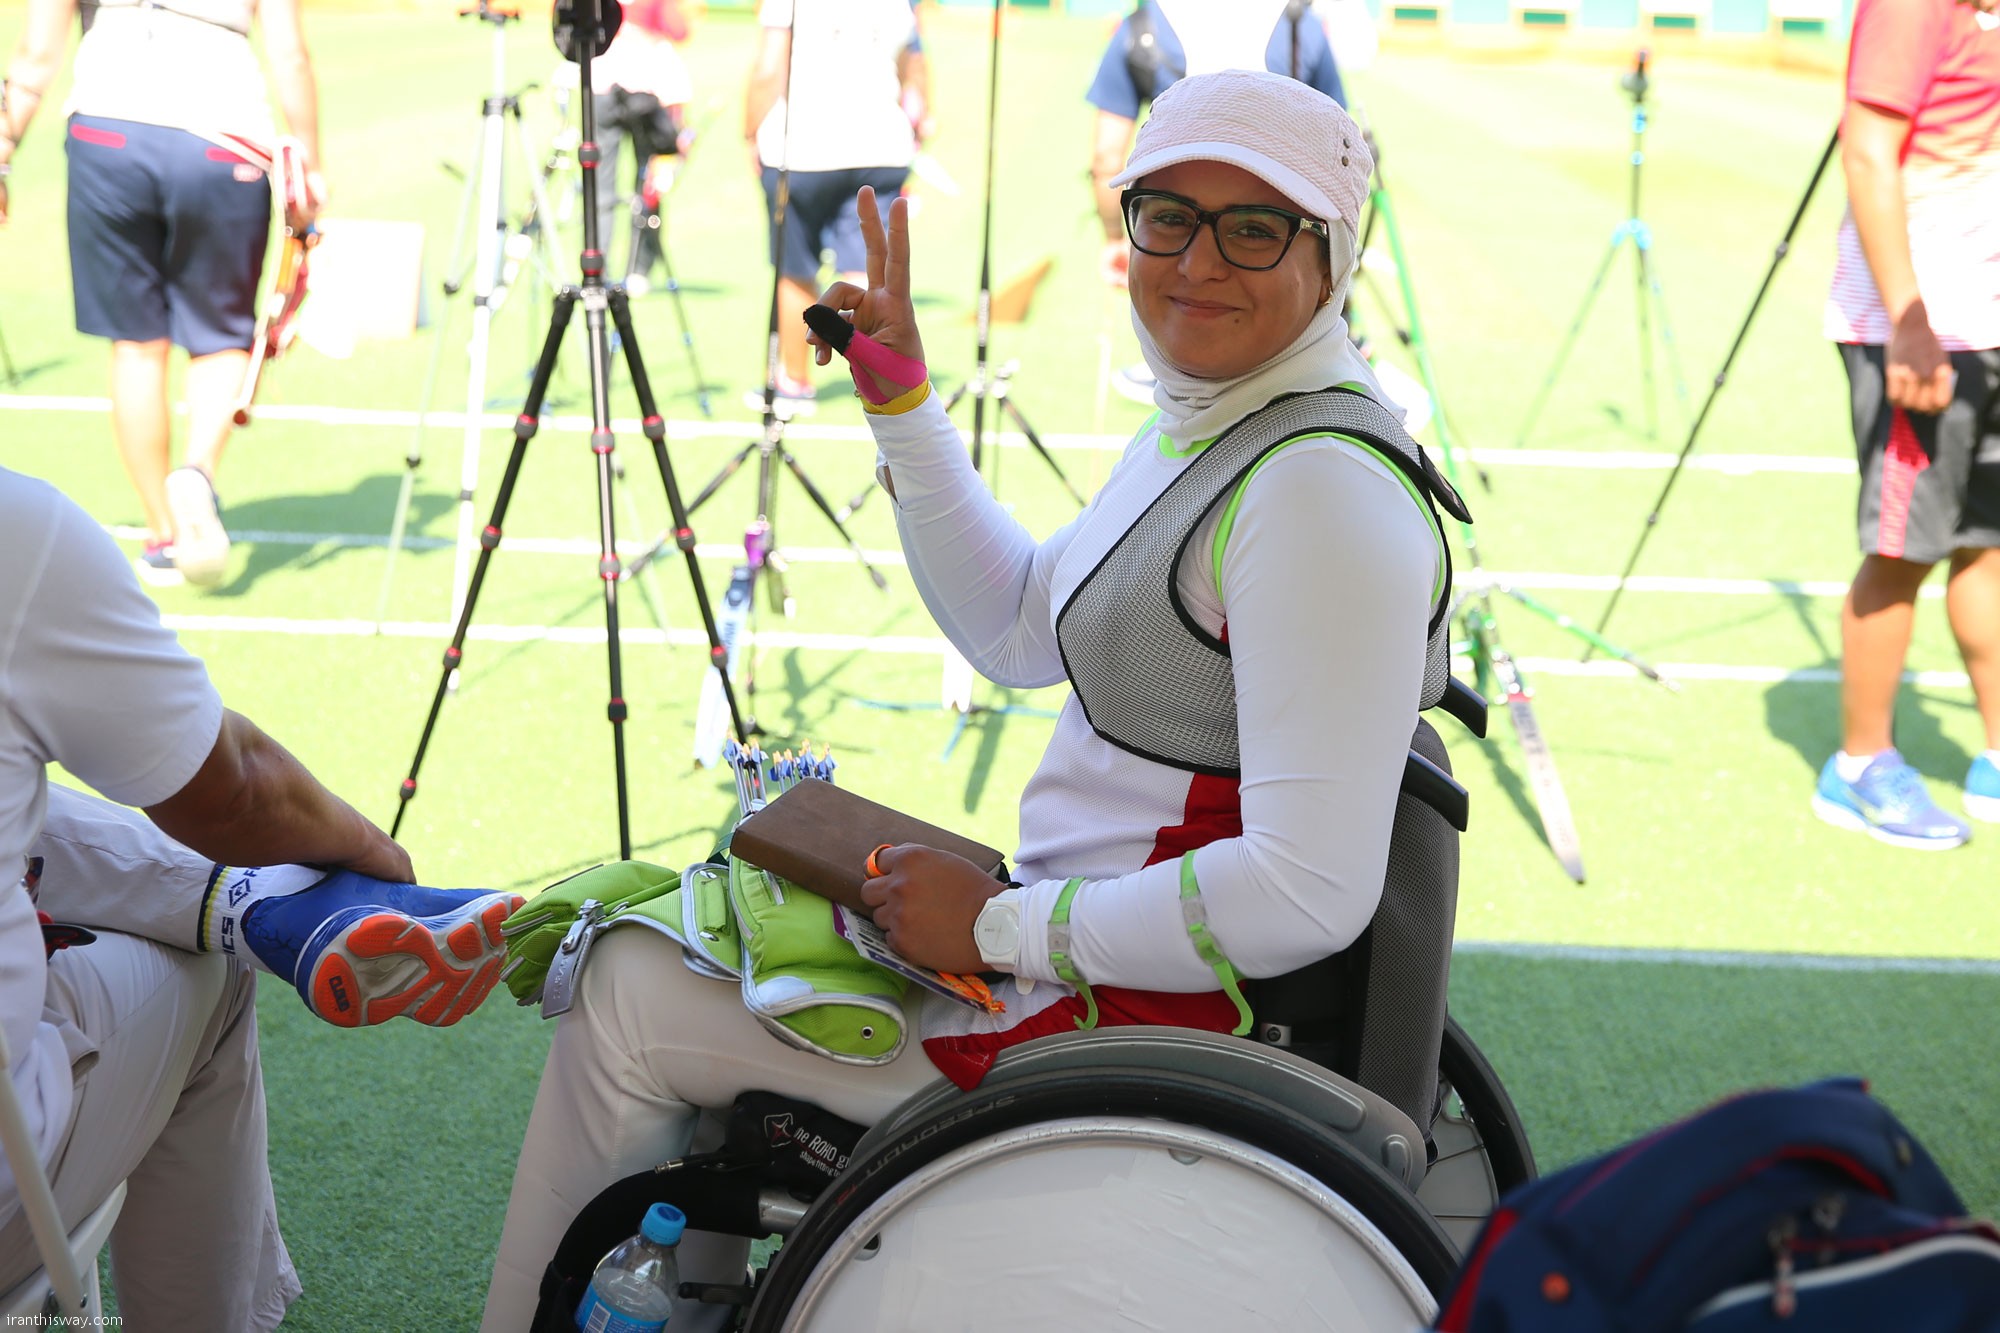 Iranian woman performance second best in Rio 2016